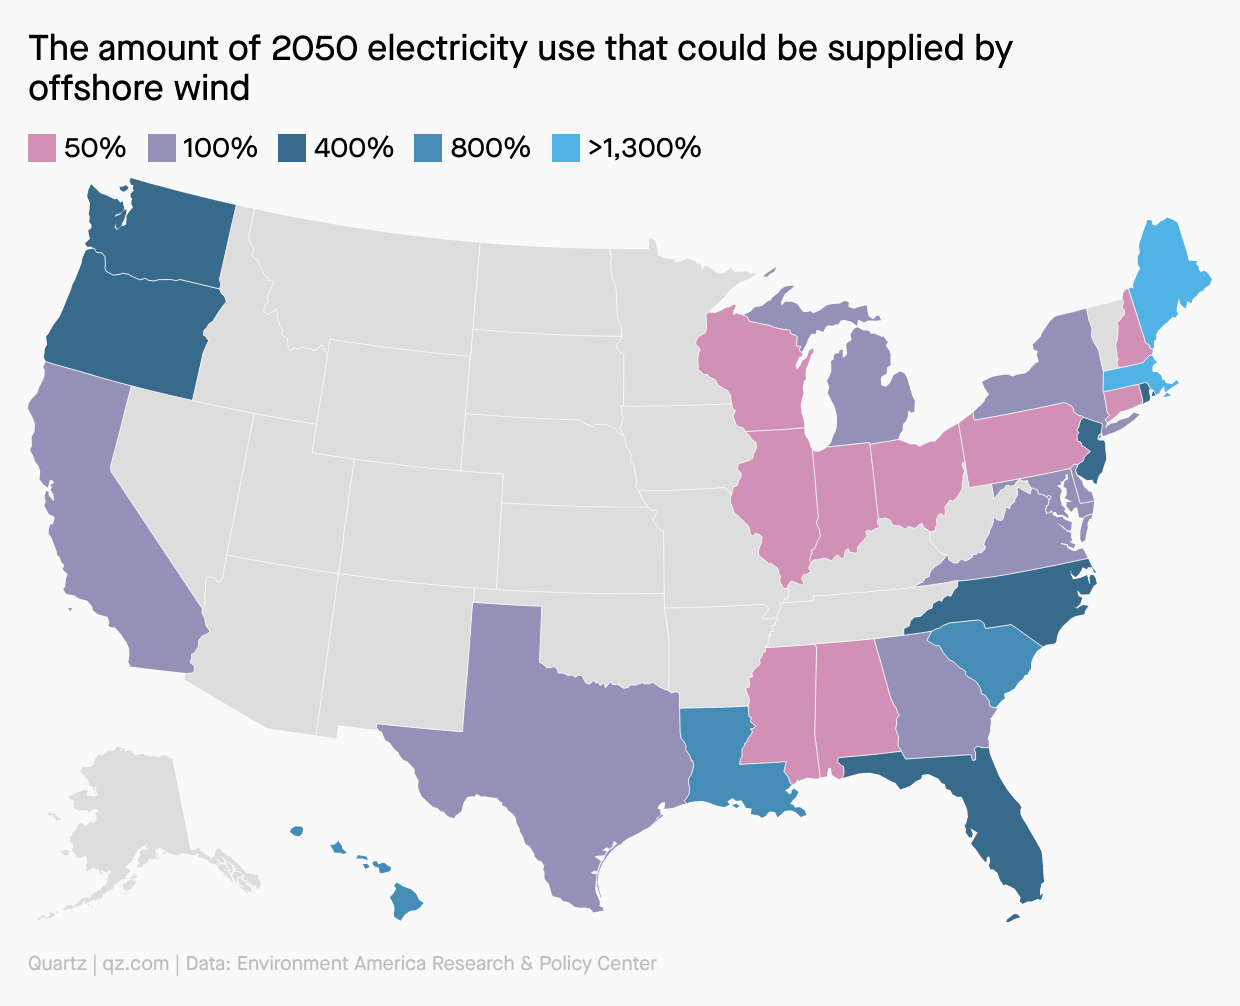 A map of the amount of 2050 electricity use that could be supplied by offshore wind, with more than 1,300% in Maine and Massachusetts.